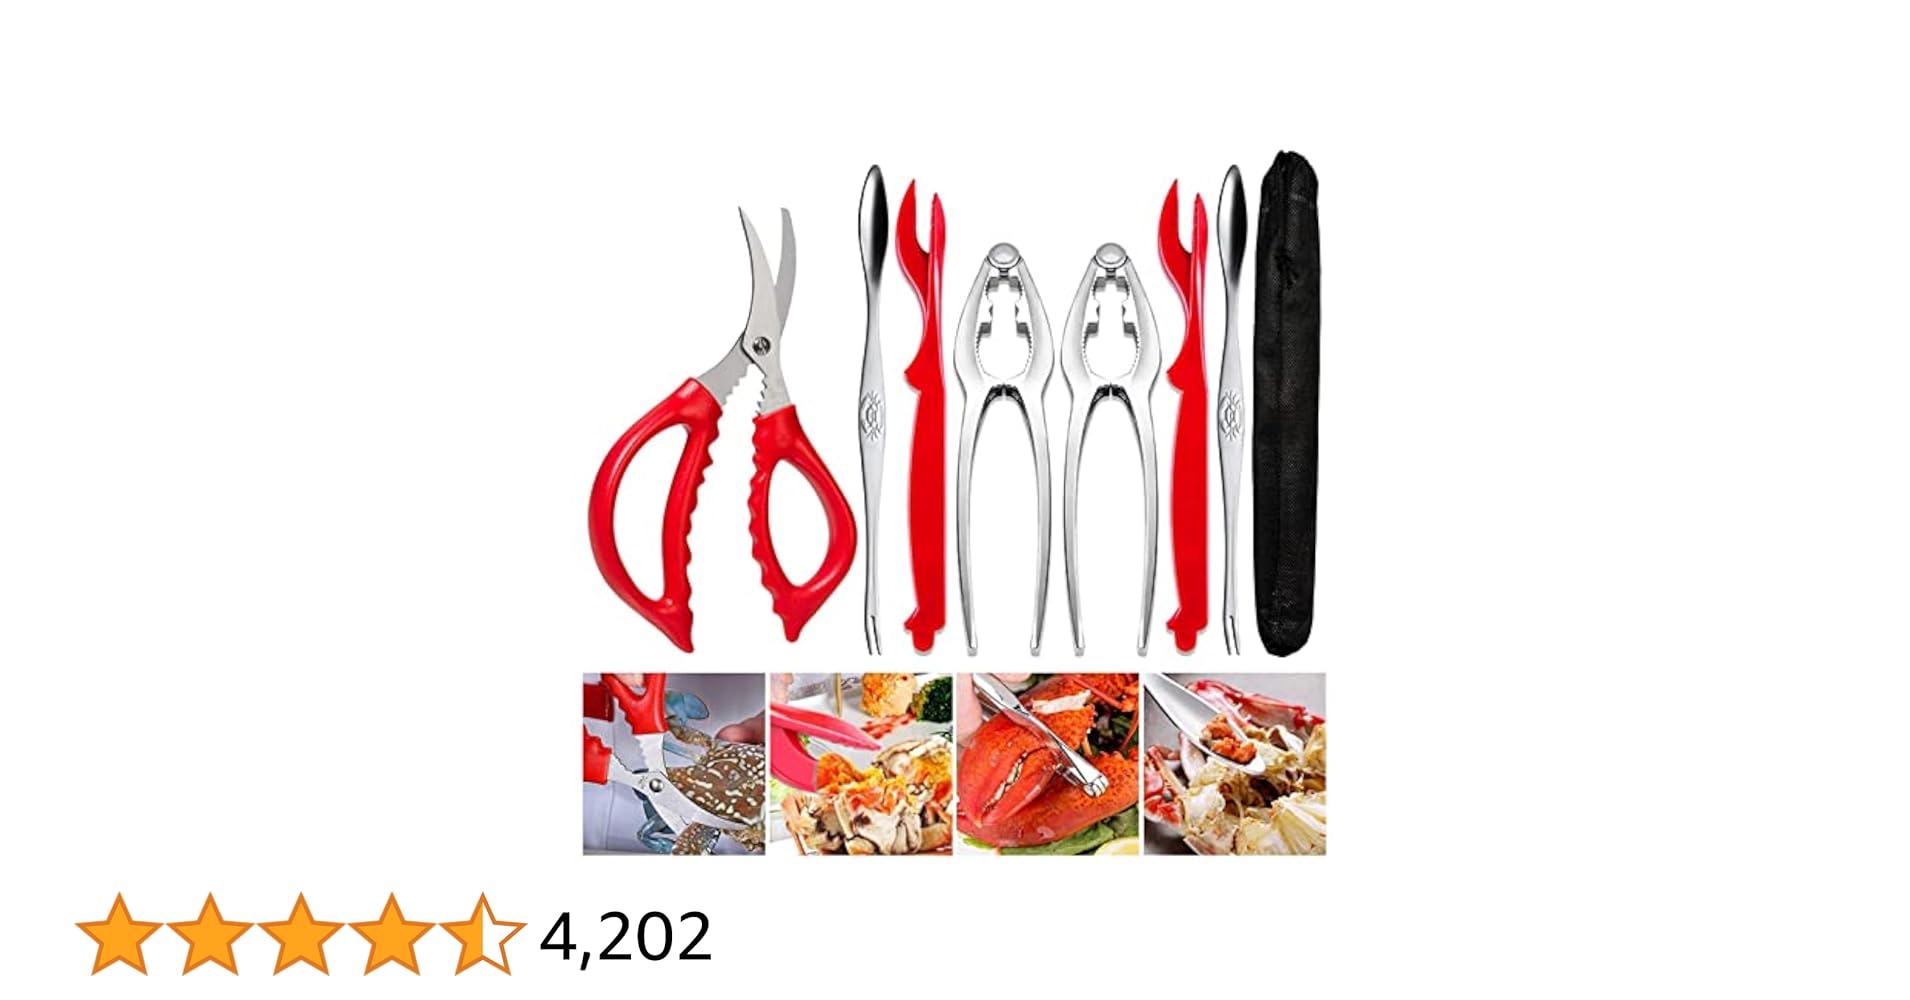 Crab Leg Crackers and Tools - Lobster Crackers and Picks Set Shellfish Crab Claw Cracker Stainless Steel Seafood Crackers & Forks - lobster tools for eating